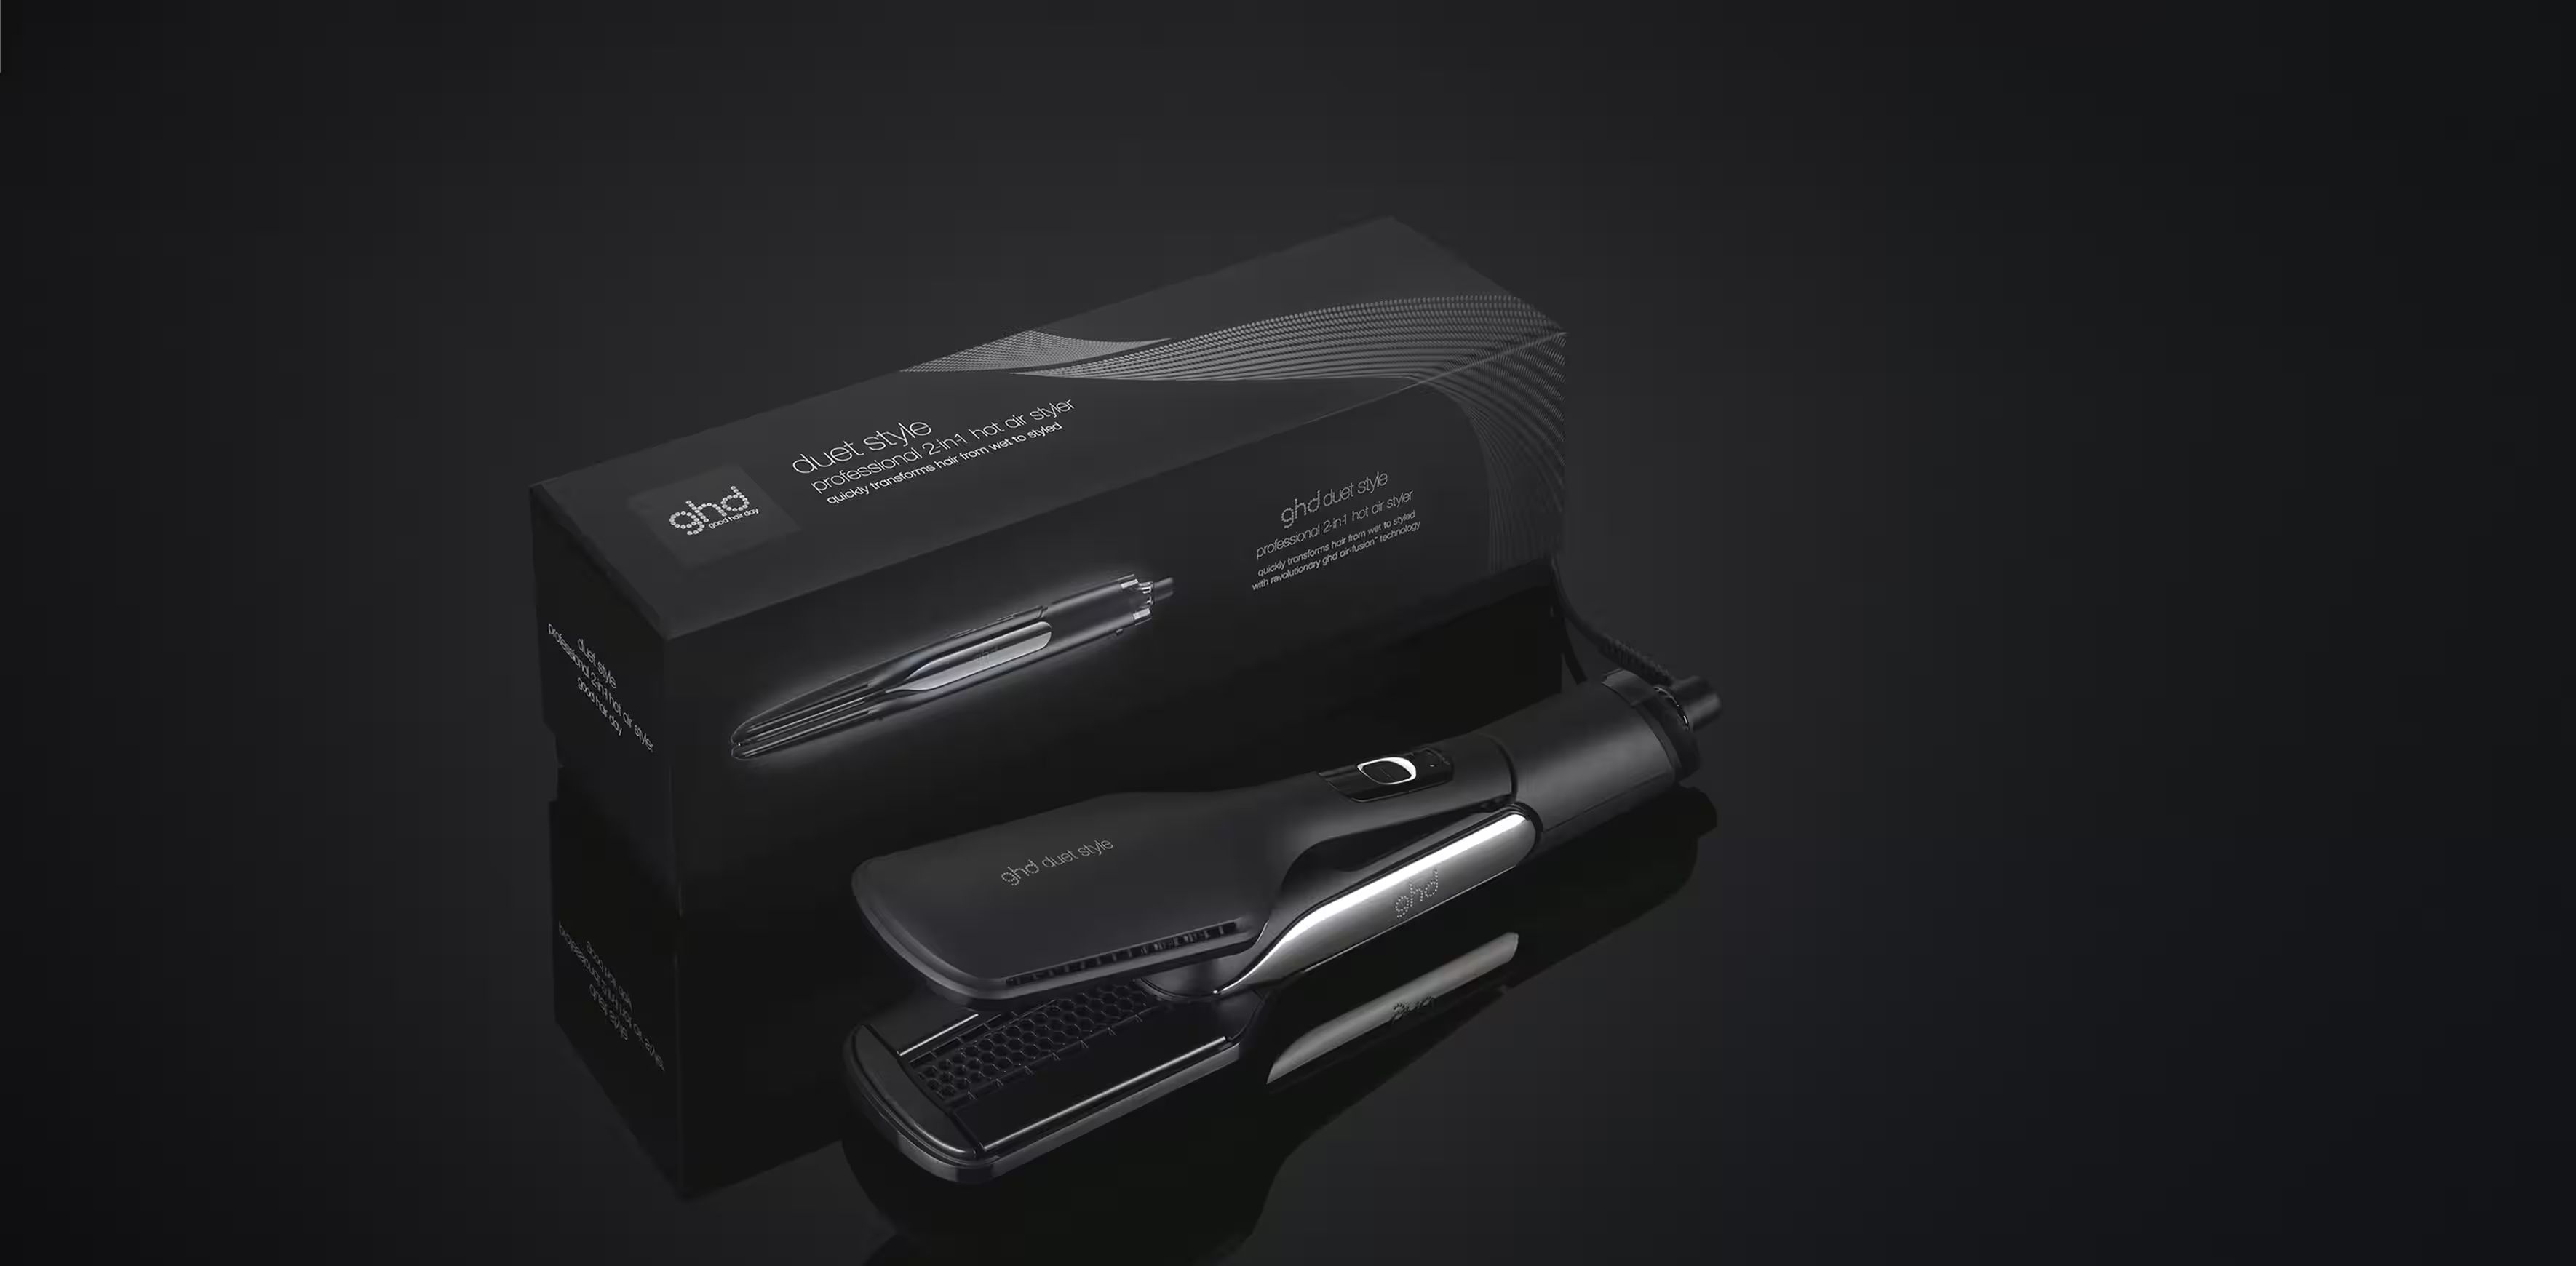 NEW GHD DUET STYLE HOT AIR STYLER IN BLACK | ghd (UK)